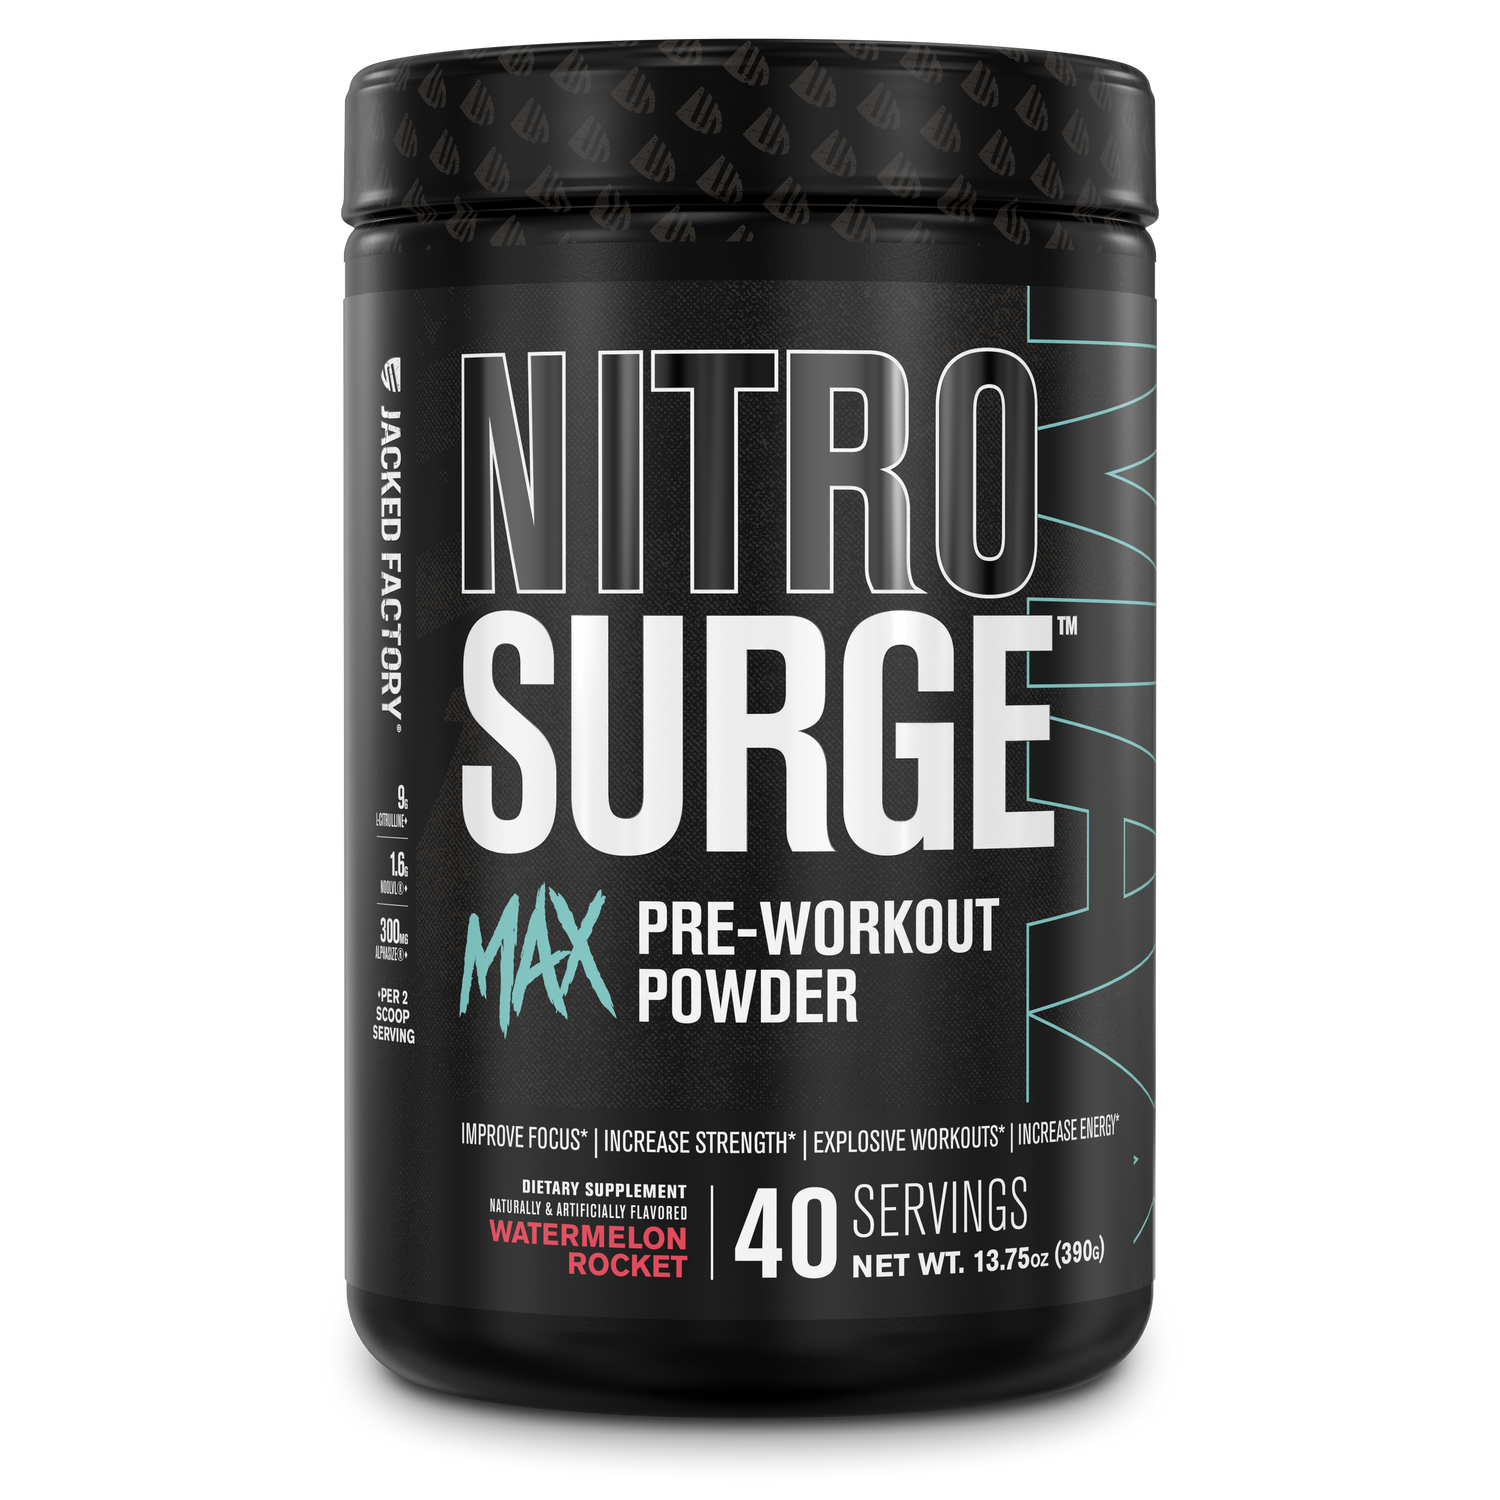 Jacked Factory Nitrosurge MAX Pre Workout Powder (40 servings) Watermelon Rocket in a black tub with a black label and black lid